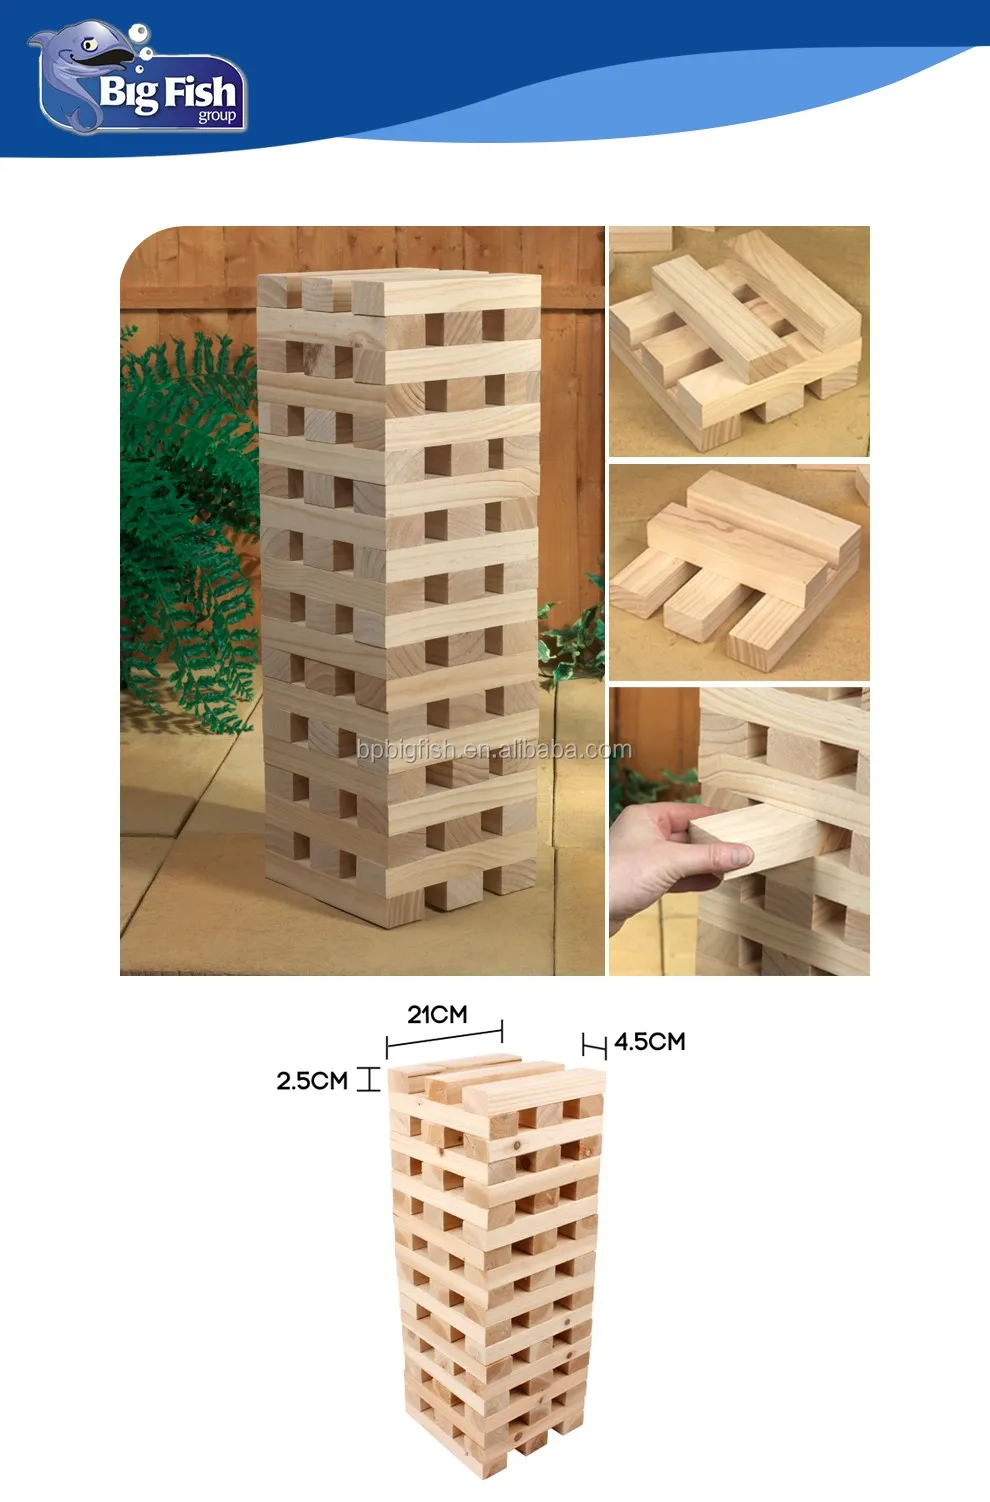 Outdoor Game Wooden Block Giant Tumbling For Kids & Adults - Buy Giant Tower Wooden Blocks,Outdoor Wooden Block,Wooden Tumbling Tower Game Product on Alibaba.com